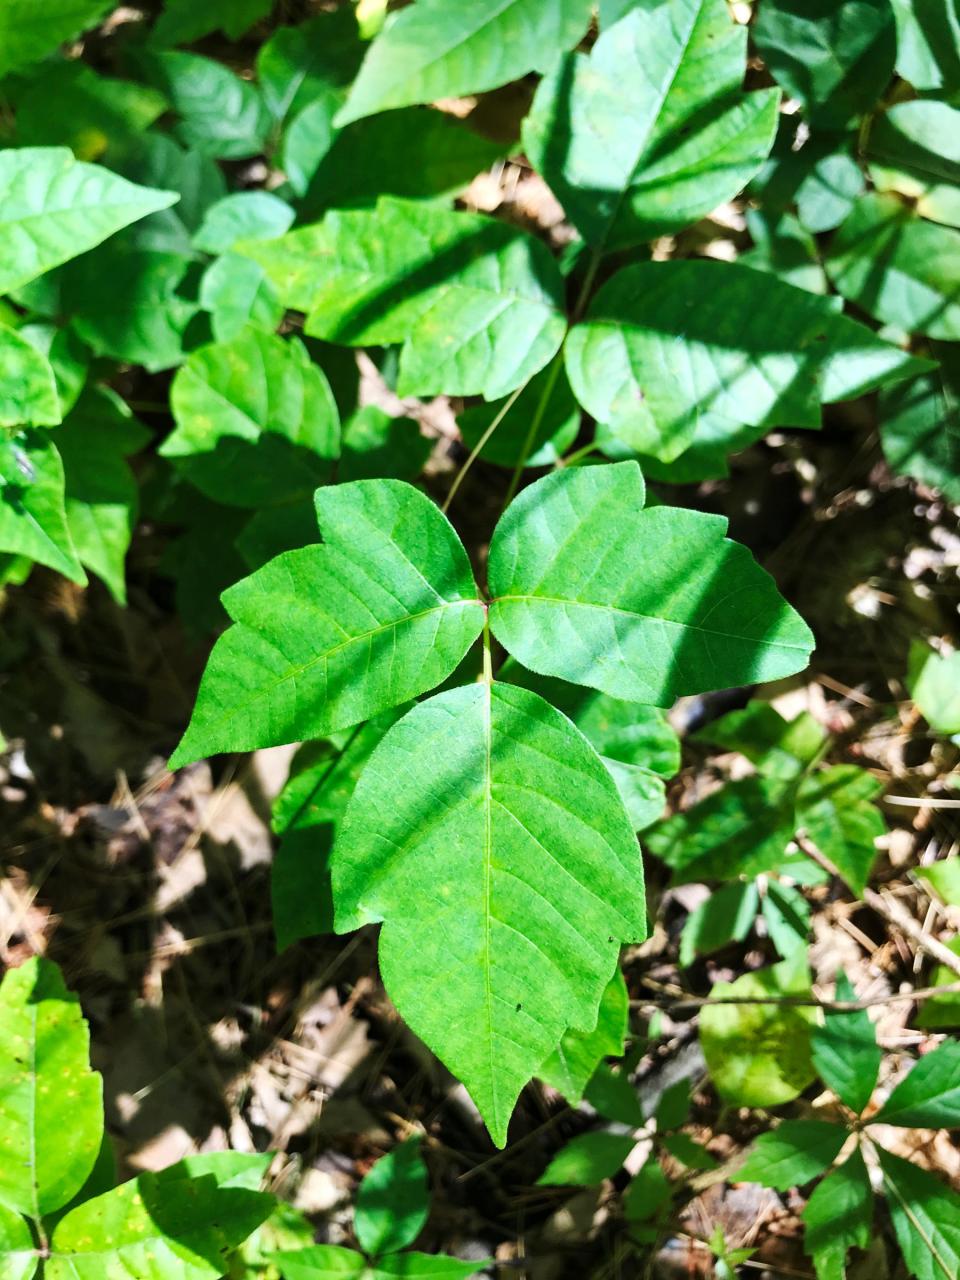 As carbon dioxide levels in the atmosphere continue to increase, poison ivy will take advantage of the greenhouse gas and grow more quickly as well as growing more toxic. Here, poison ivy is seen off trail in the Charles C. Deam Wilderness, south of Bloomington on Tuesday, June 23, 2020.